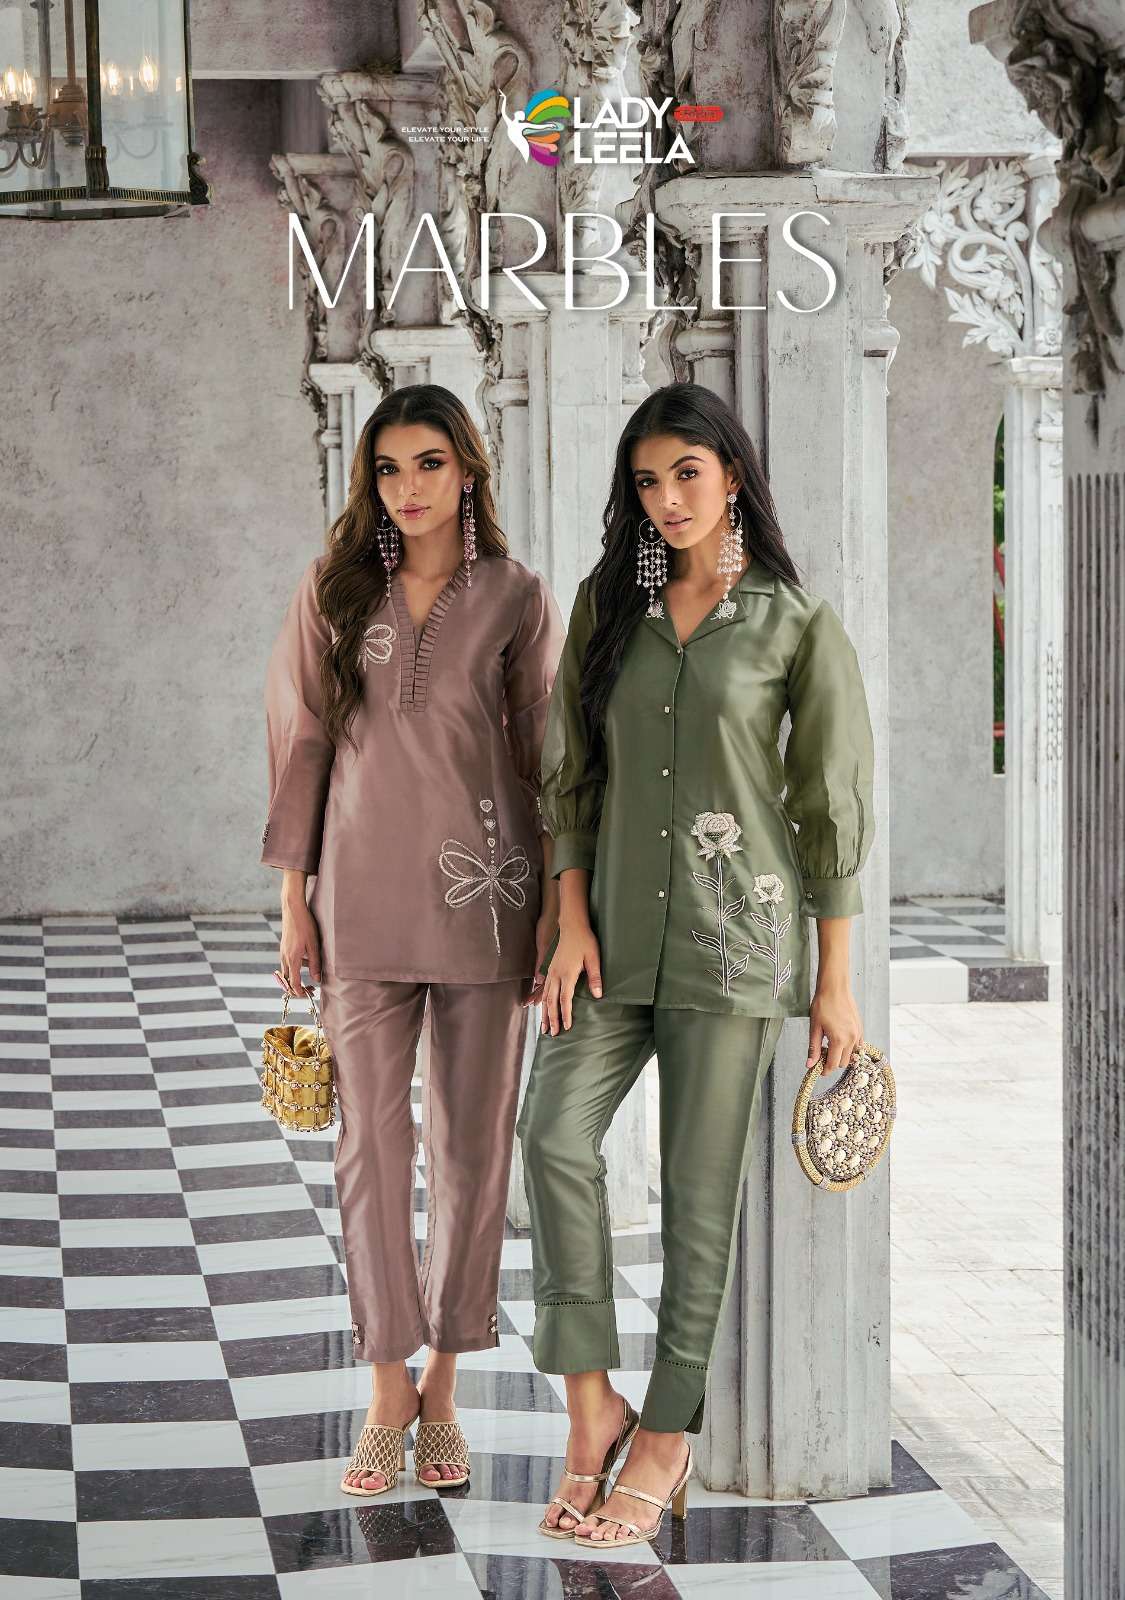 lady leela catalogue marbles premium coord set collection series 1041 to 1045  pure handwork on viscose organza fabric with inner stylish partywear cord set for women 